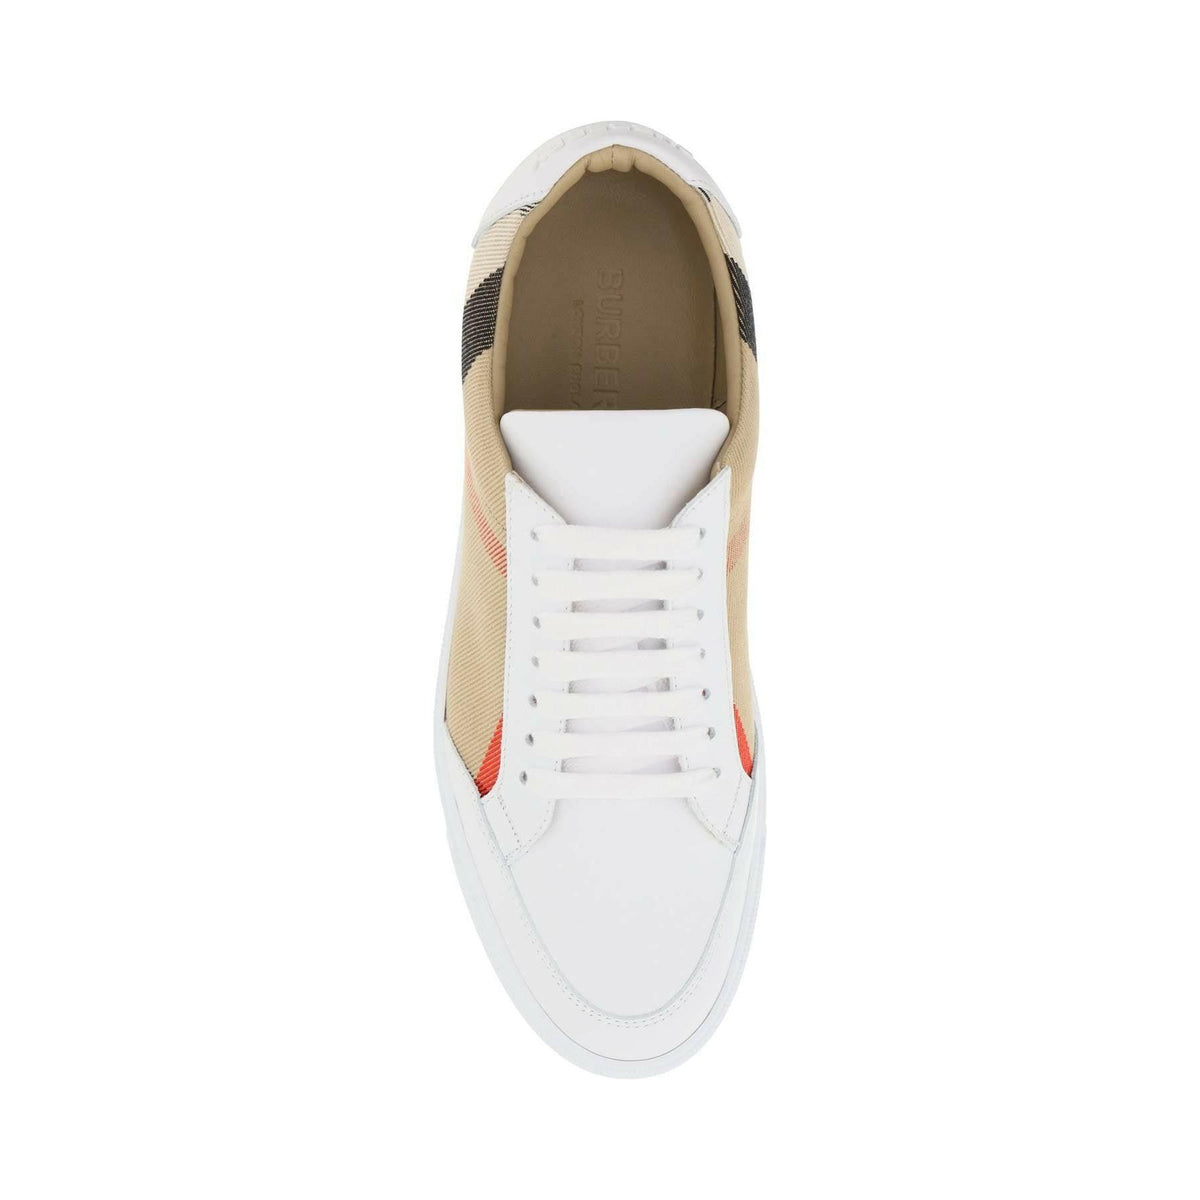 BURBERRY - Optic White House Check and Leather Sneakers - JOHN JULIA